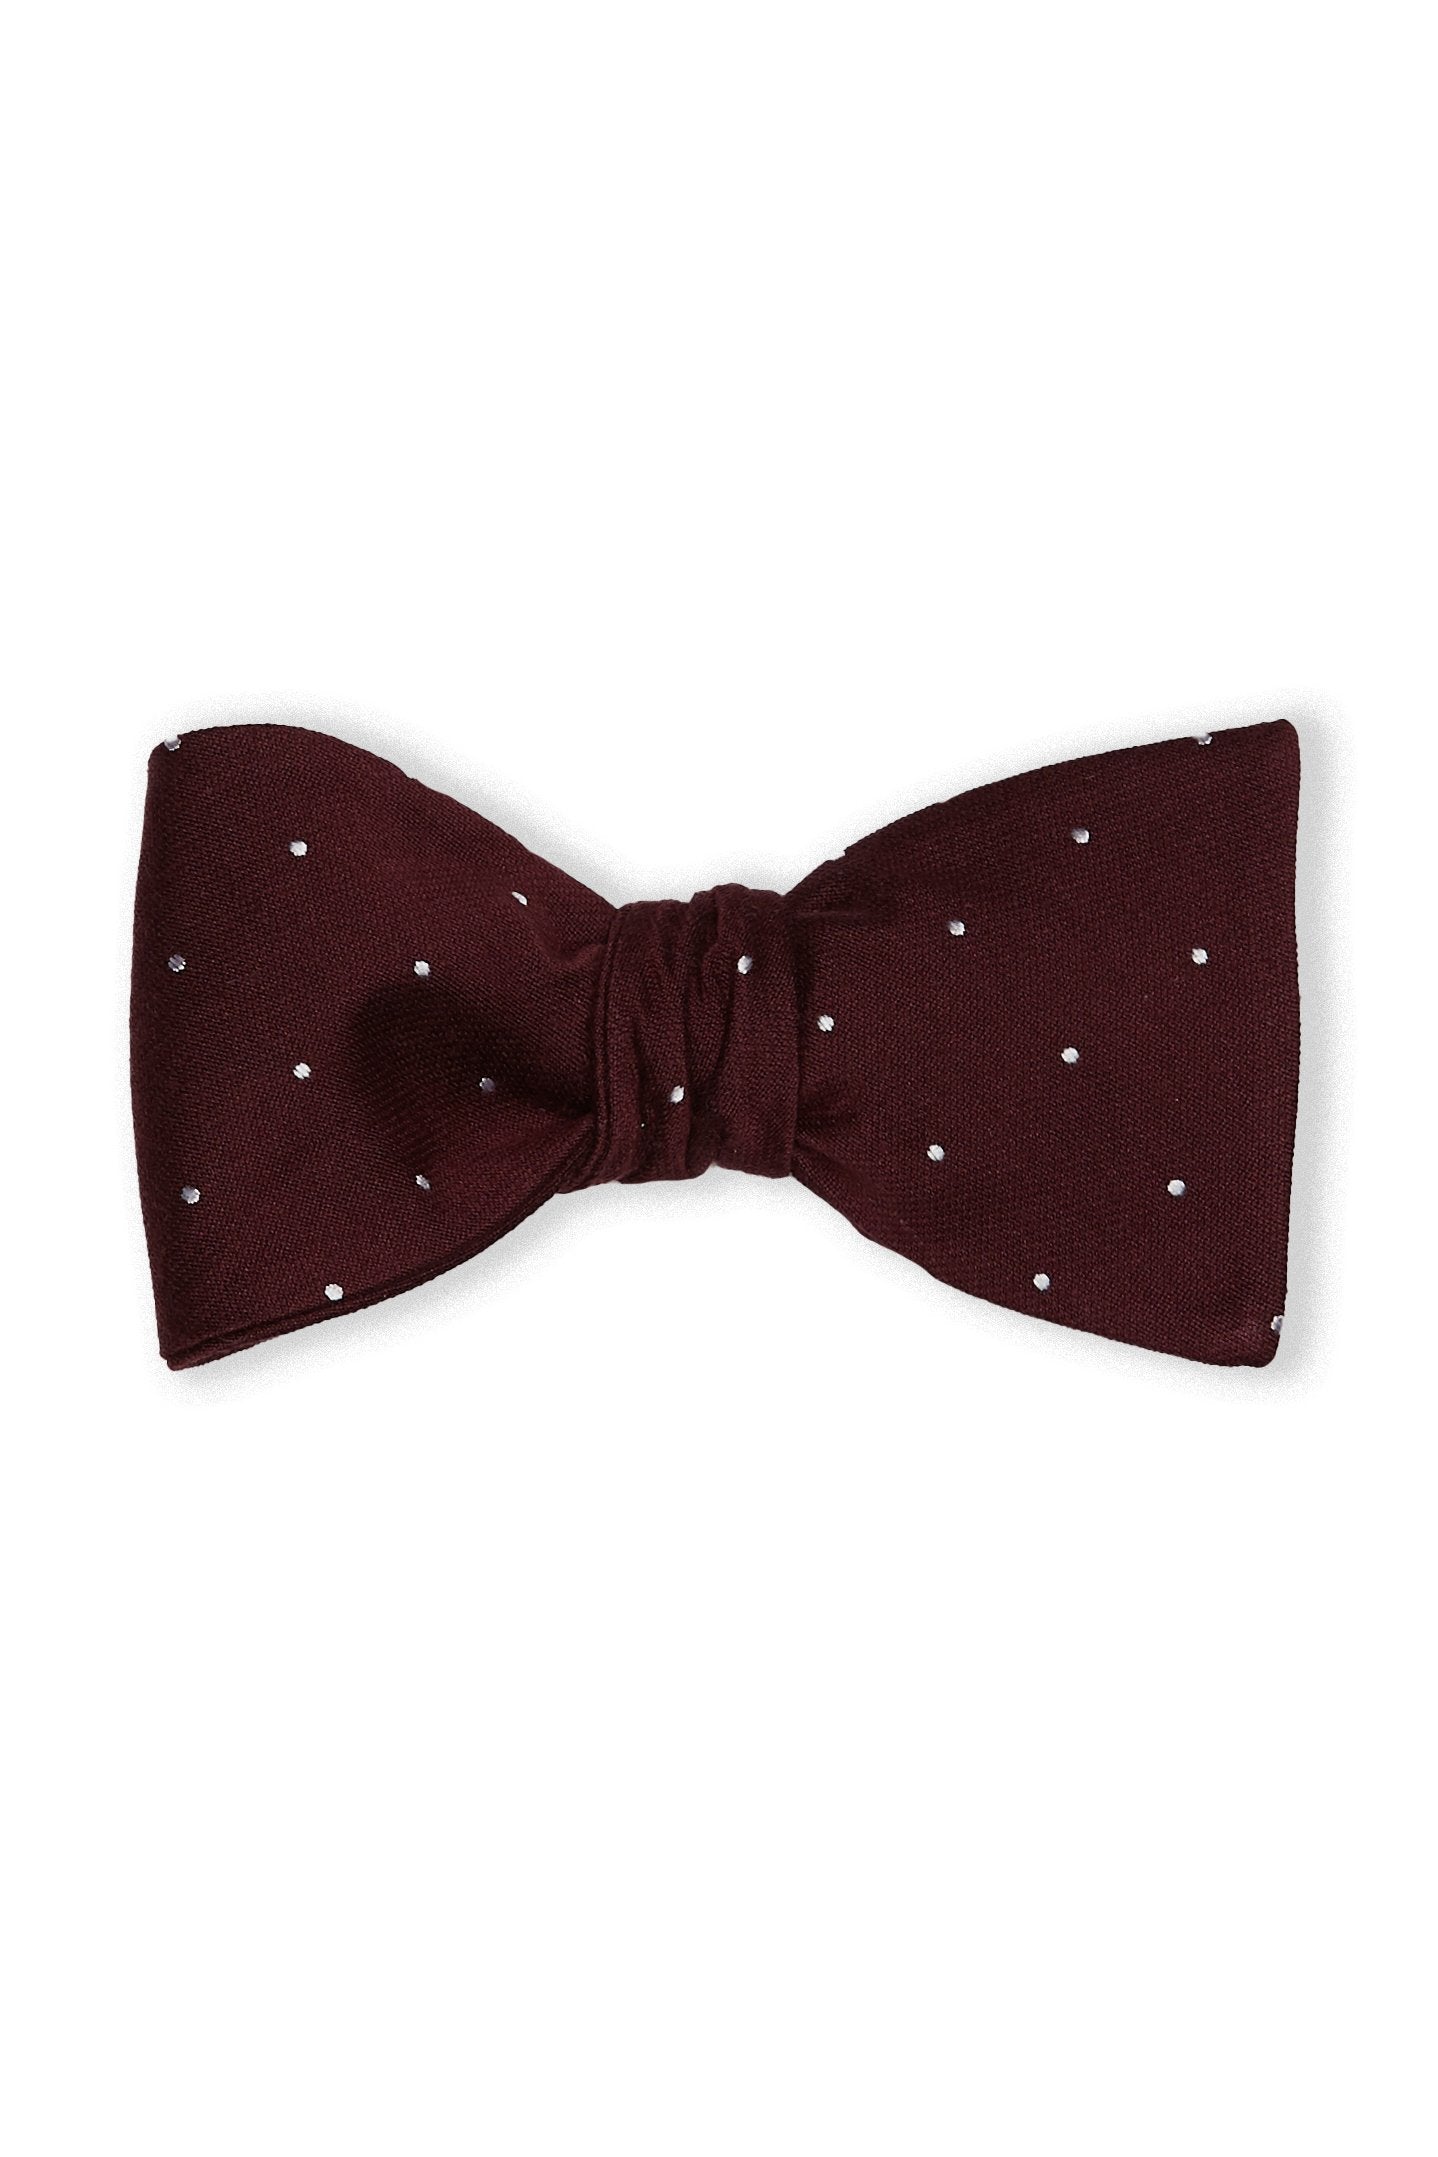 Daniel Bow Tie in Cabernet Dot by Birdy Grey, front view